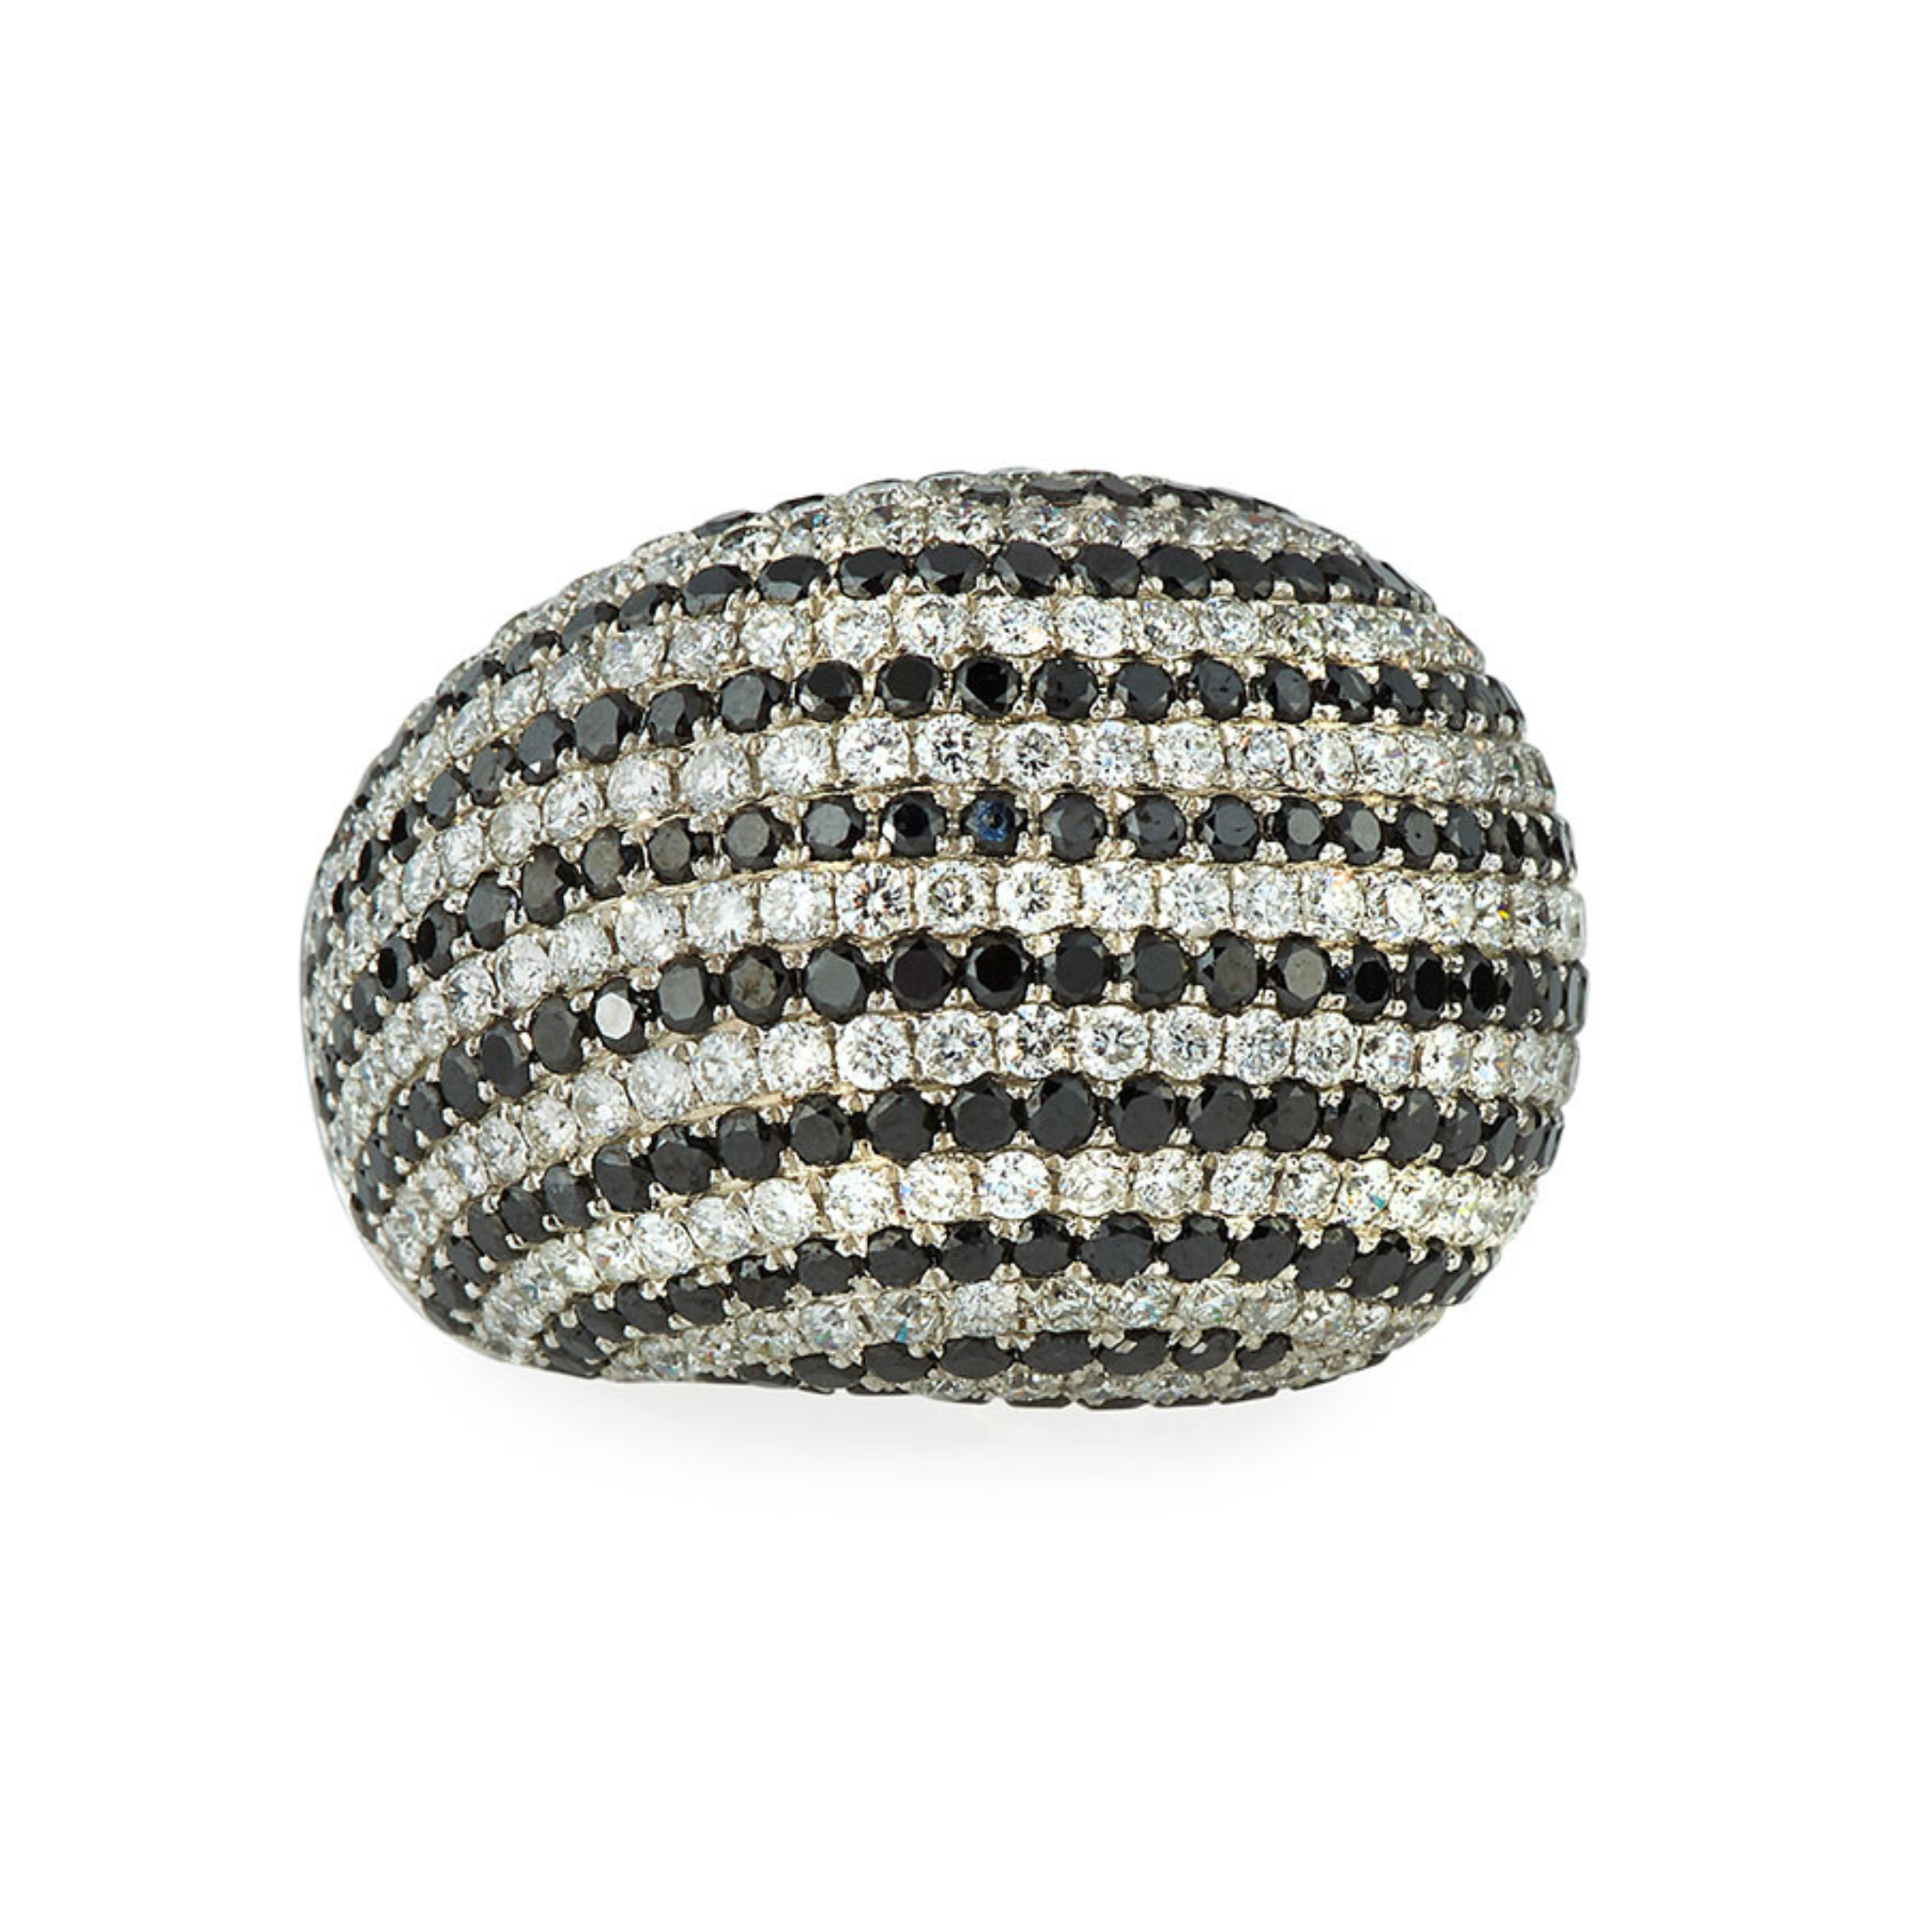 18 kt white gold diamond fashion ring containing alternating rows of black and white diamonds totaling 7.21 cts.jpg